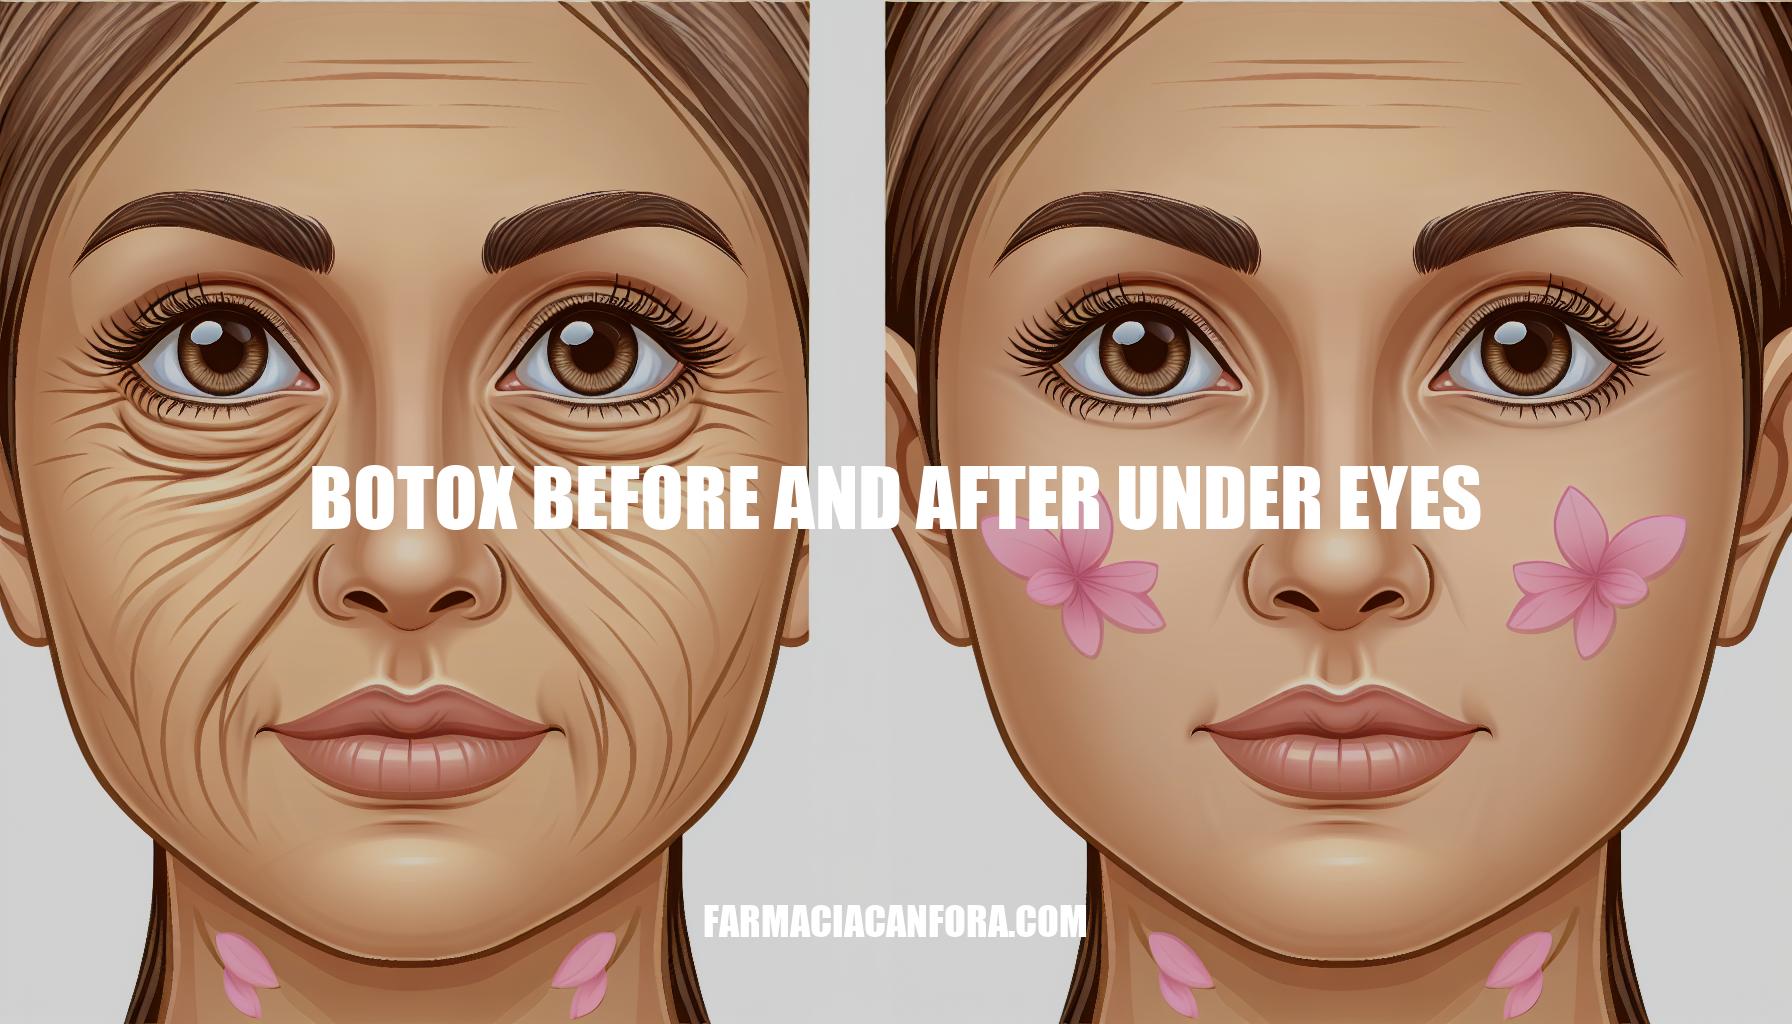 Botox Before and After Under Eyes: Complete Guide